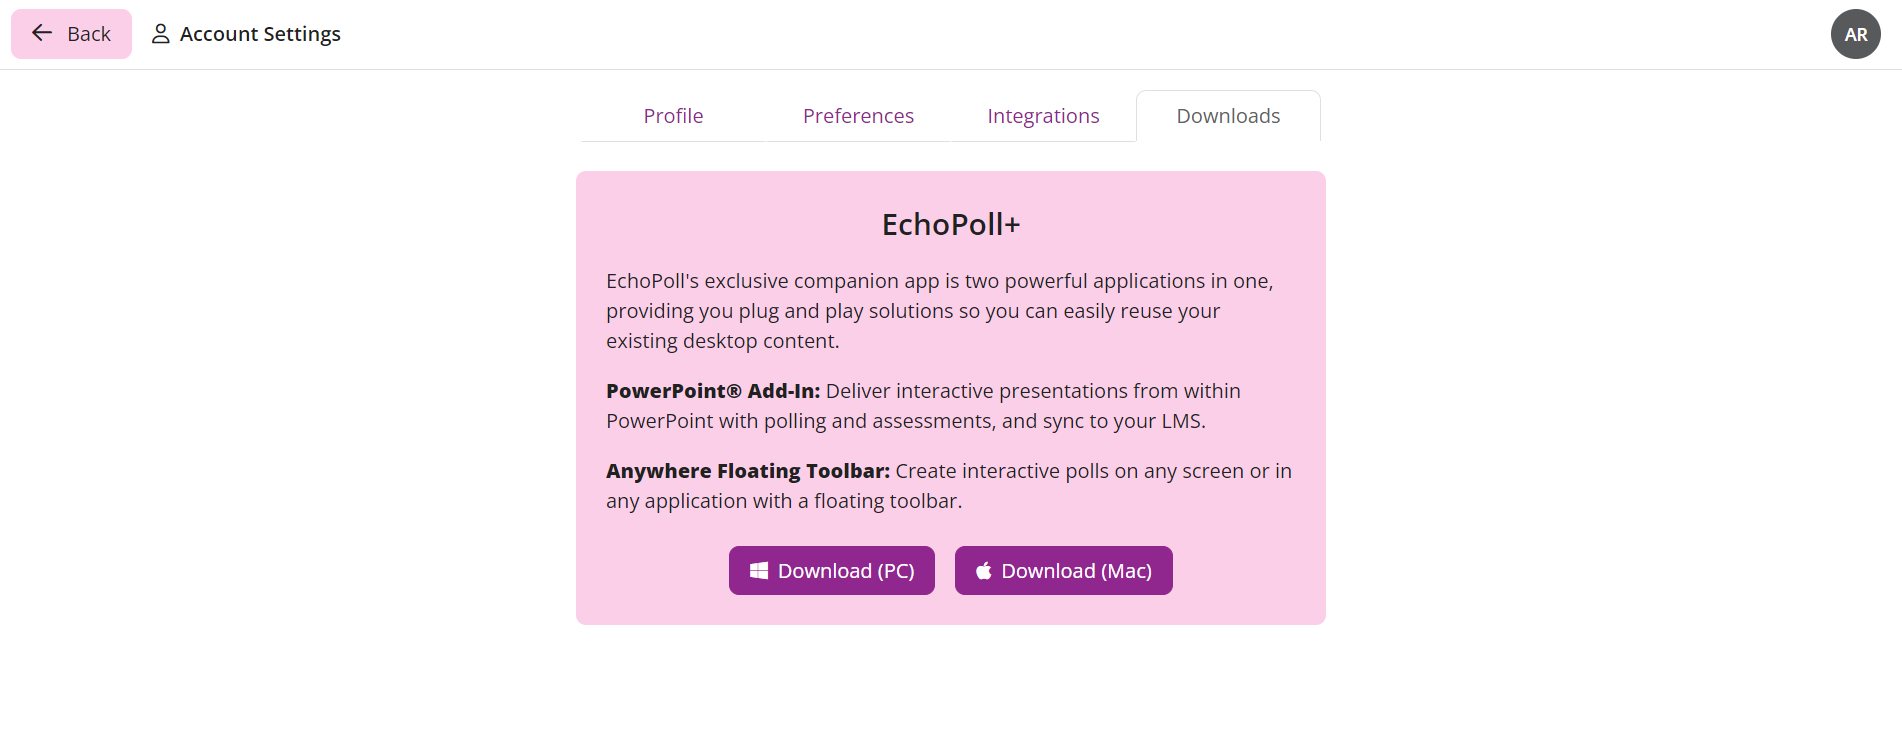 EchoPoll downloads page from within Account Settings displayed